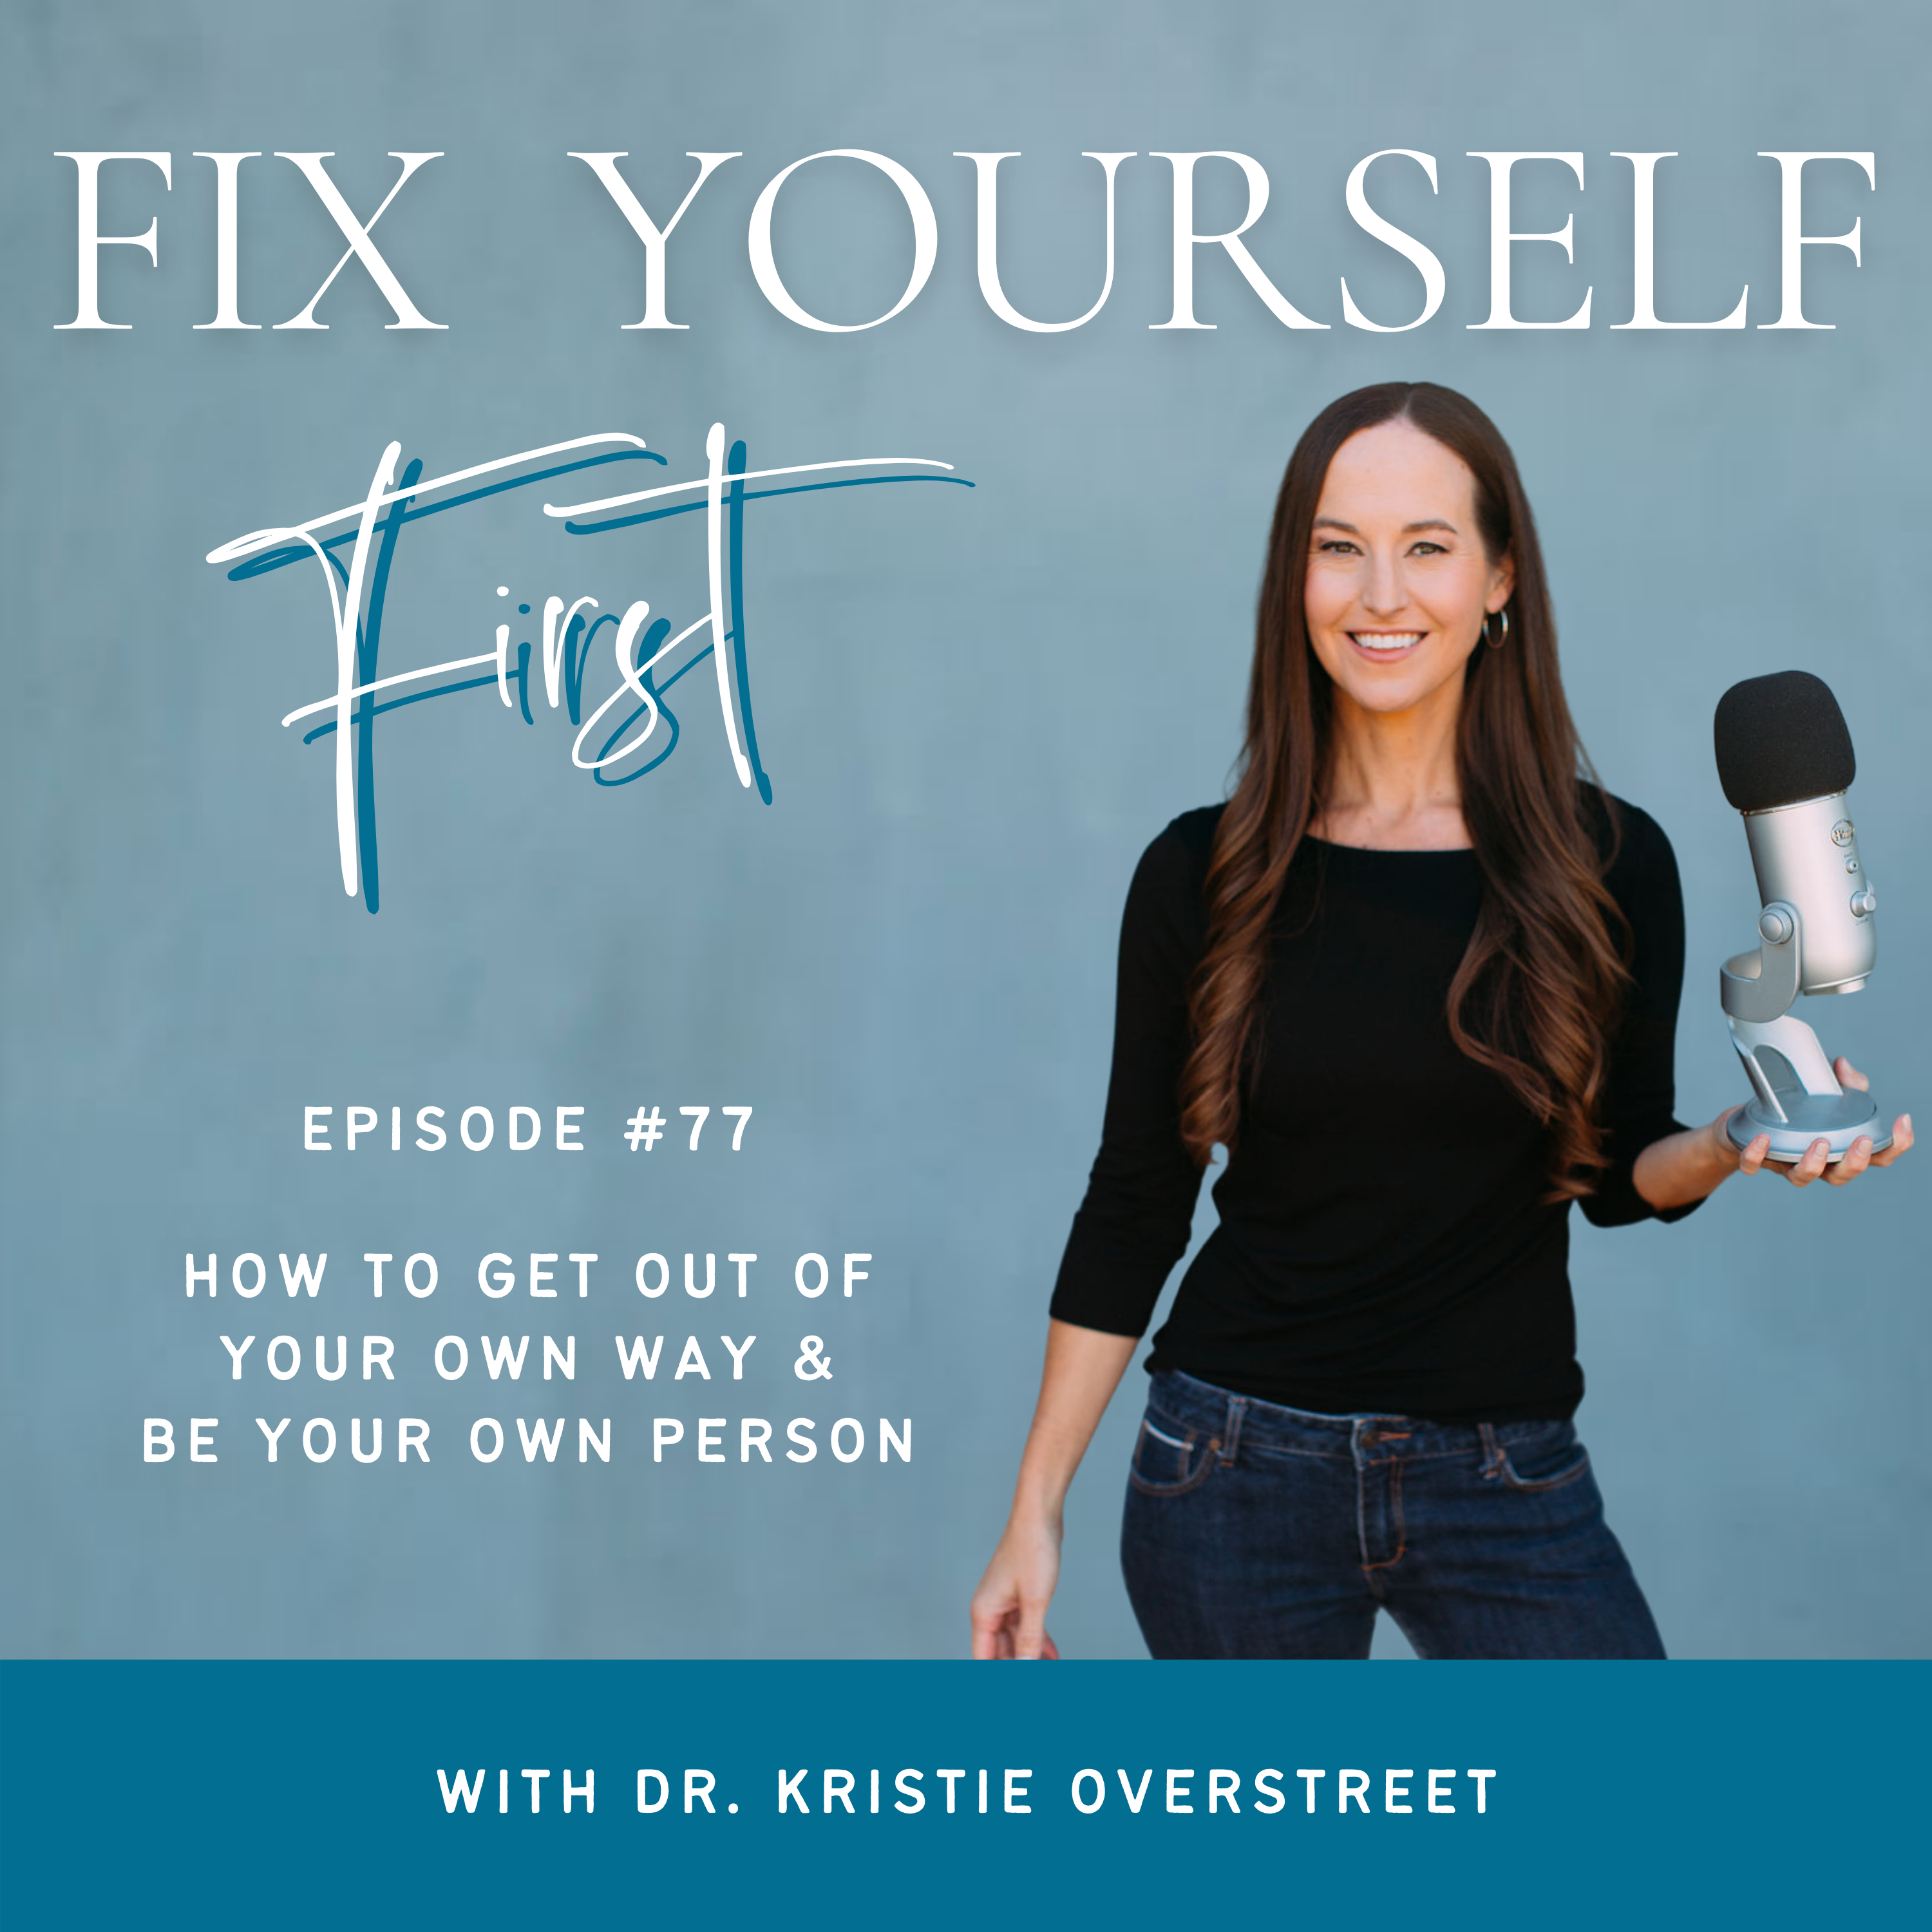 Fix Yourself First - Episode 77